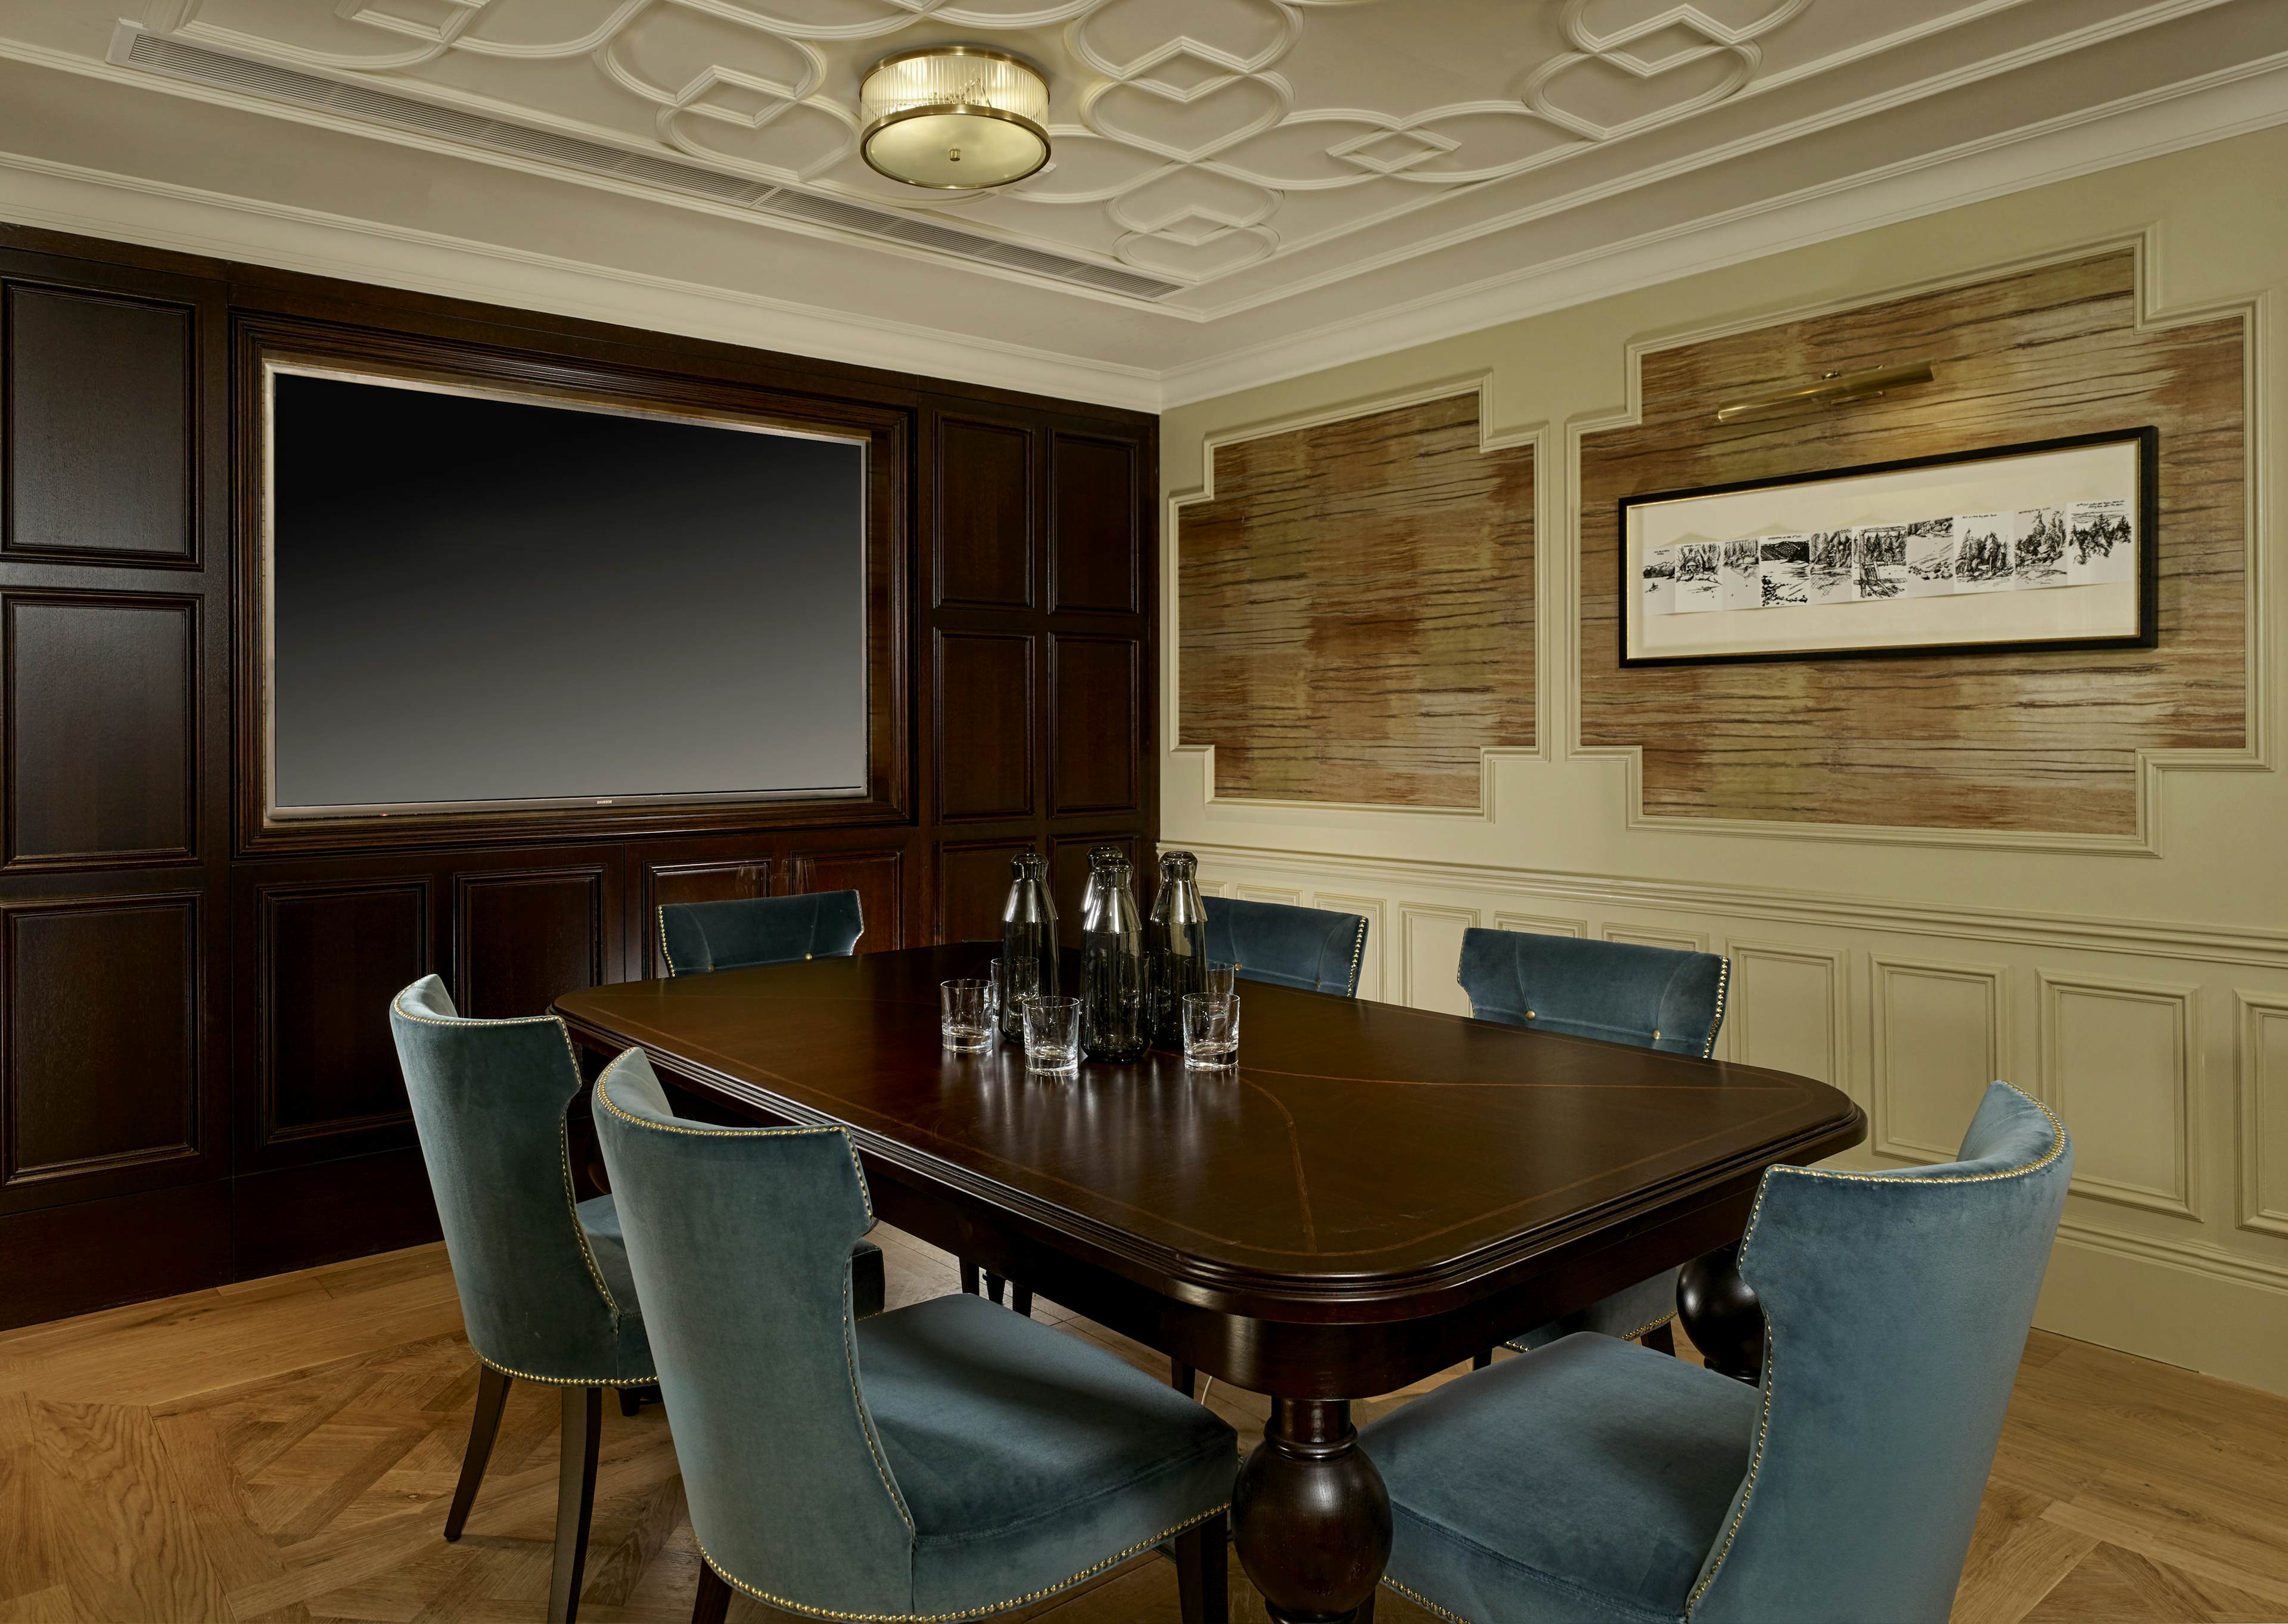 100 Queen's Gate Hotel London, Curio Collection by Hilton - Kensington Room image 2